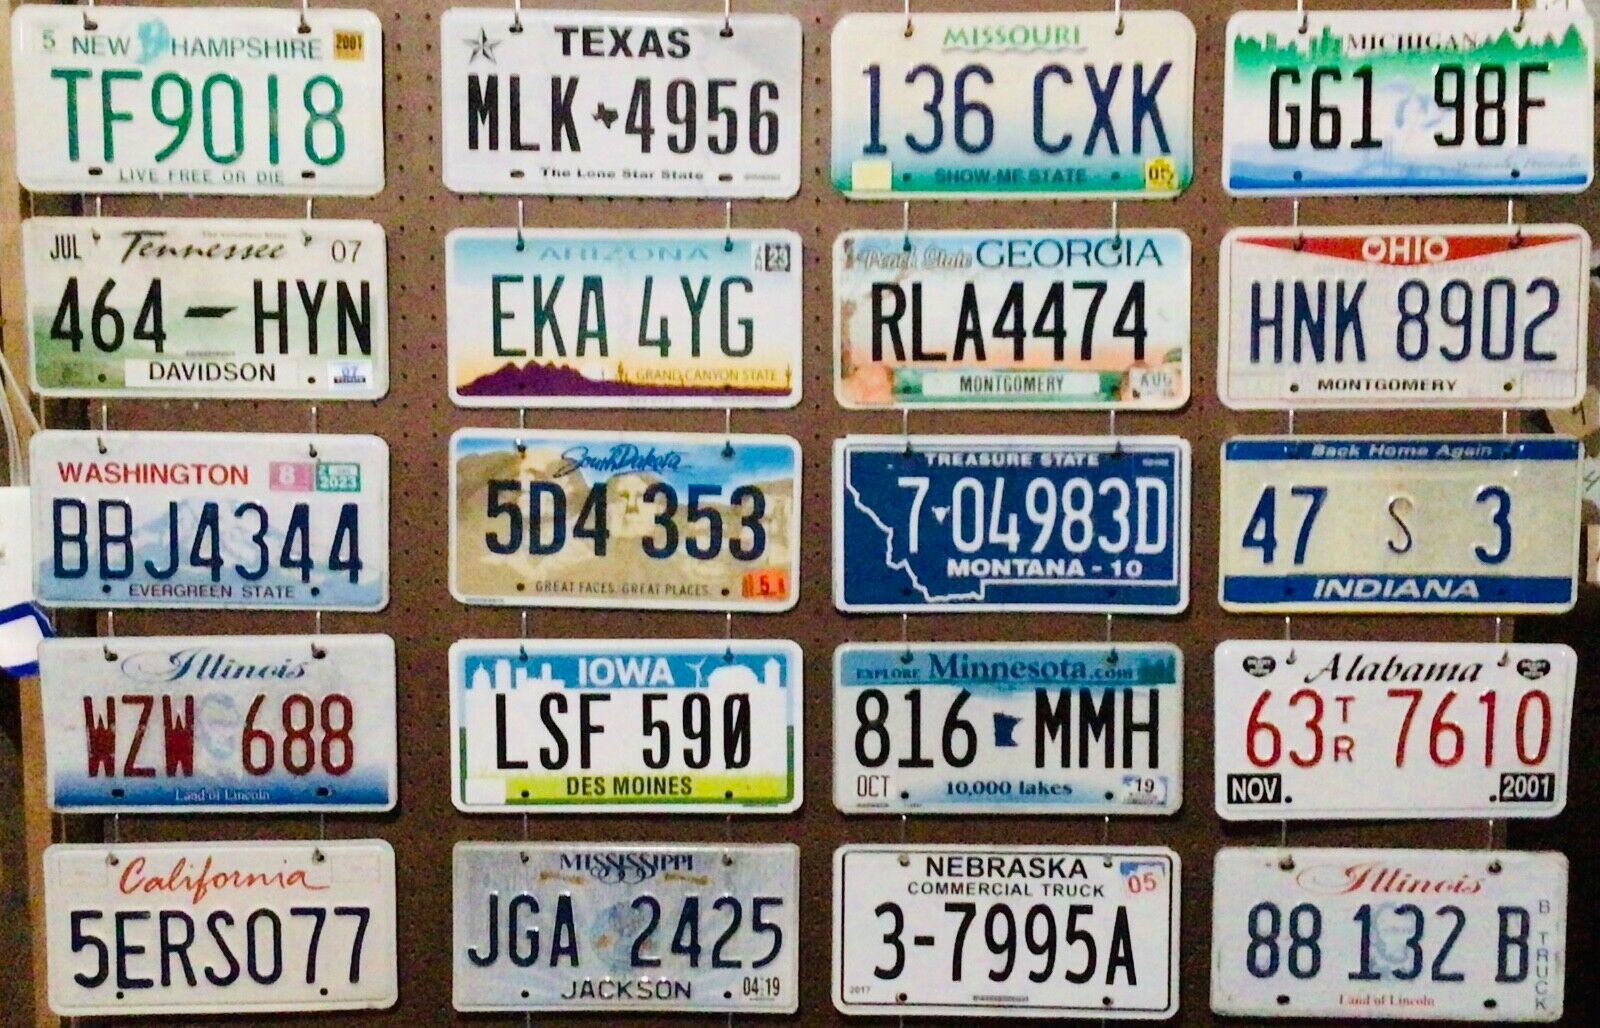 Large lot colorful of 20 old license plates - bulk - many states - low shipping